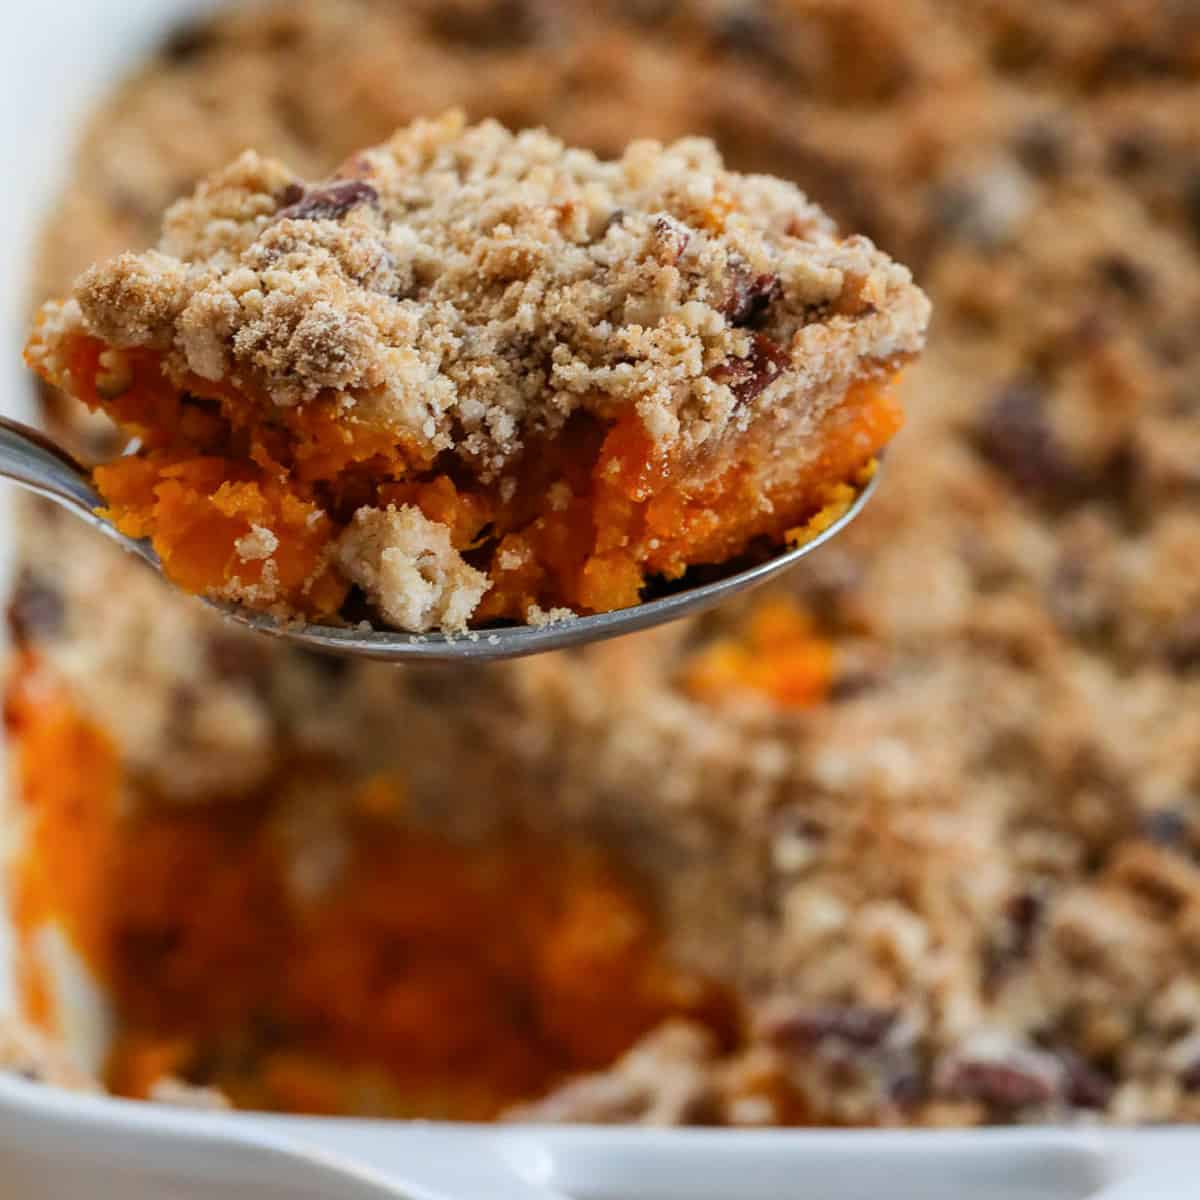 Lifting a scoop of sweet potato casserole out of a white casserole dish with large serving spoon.